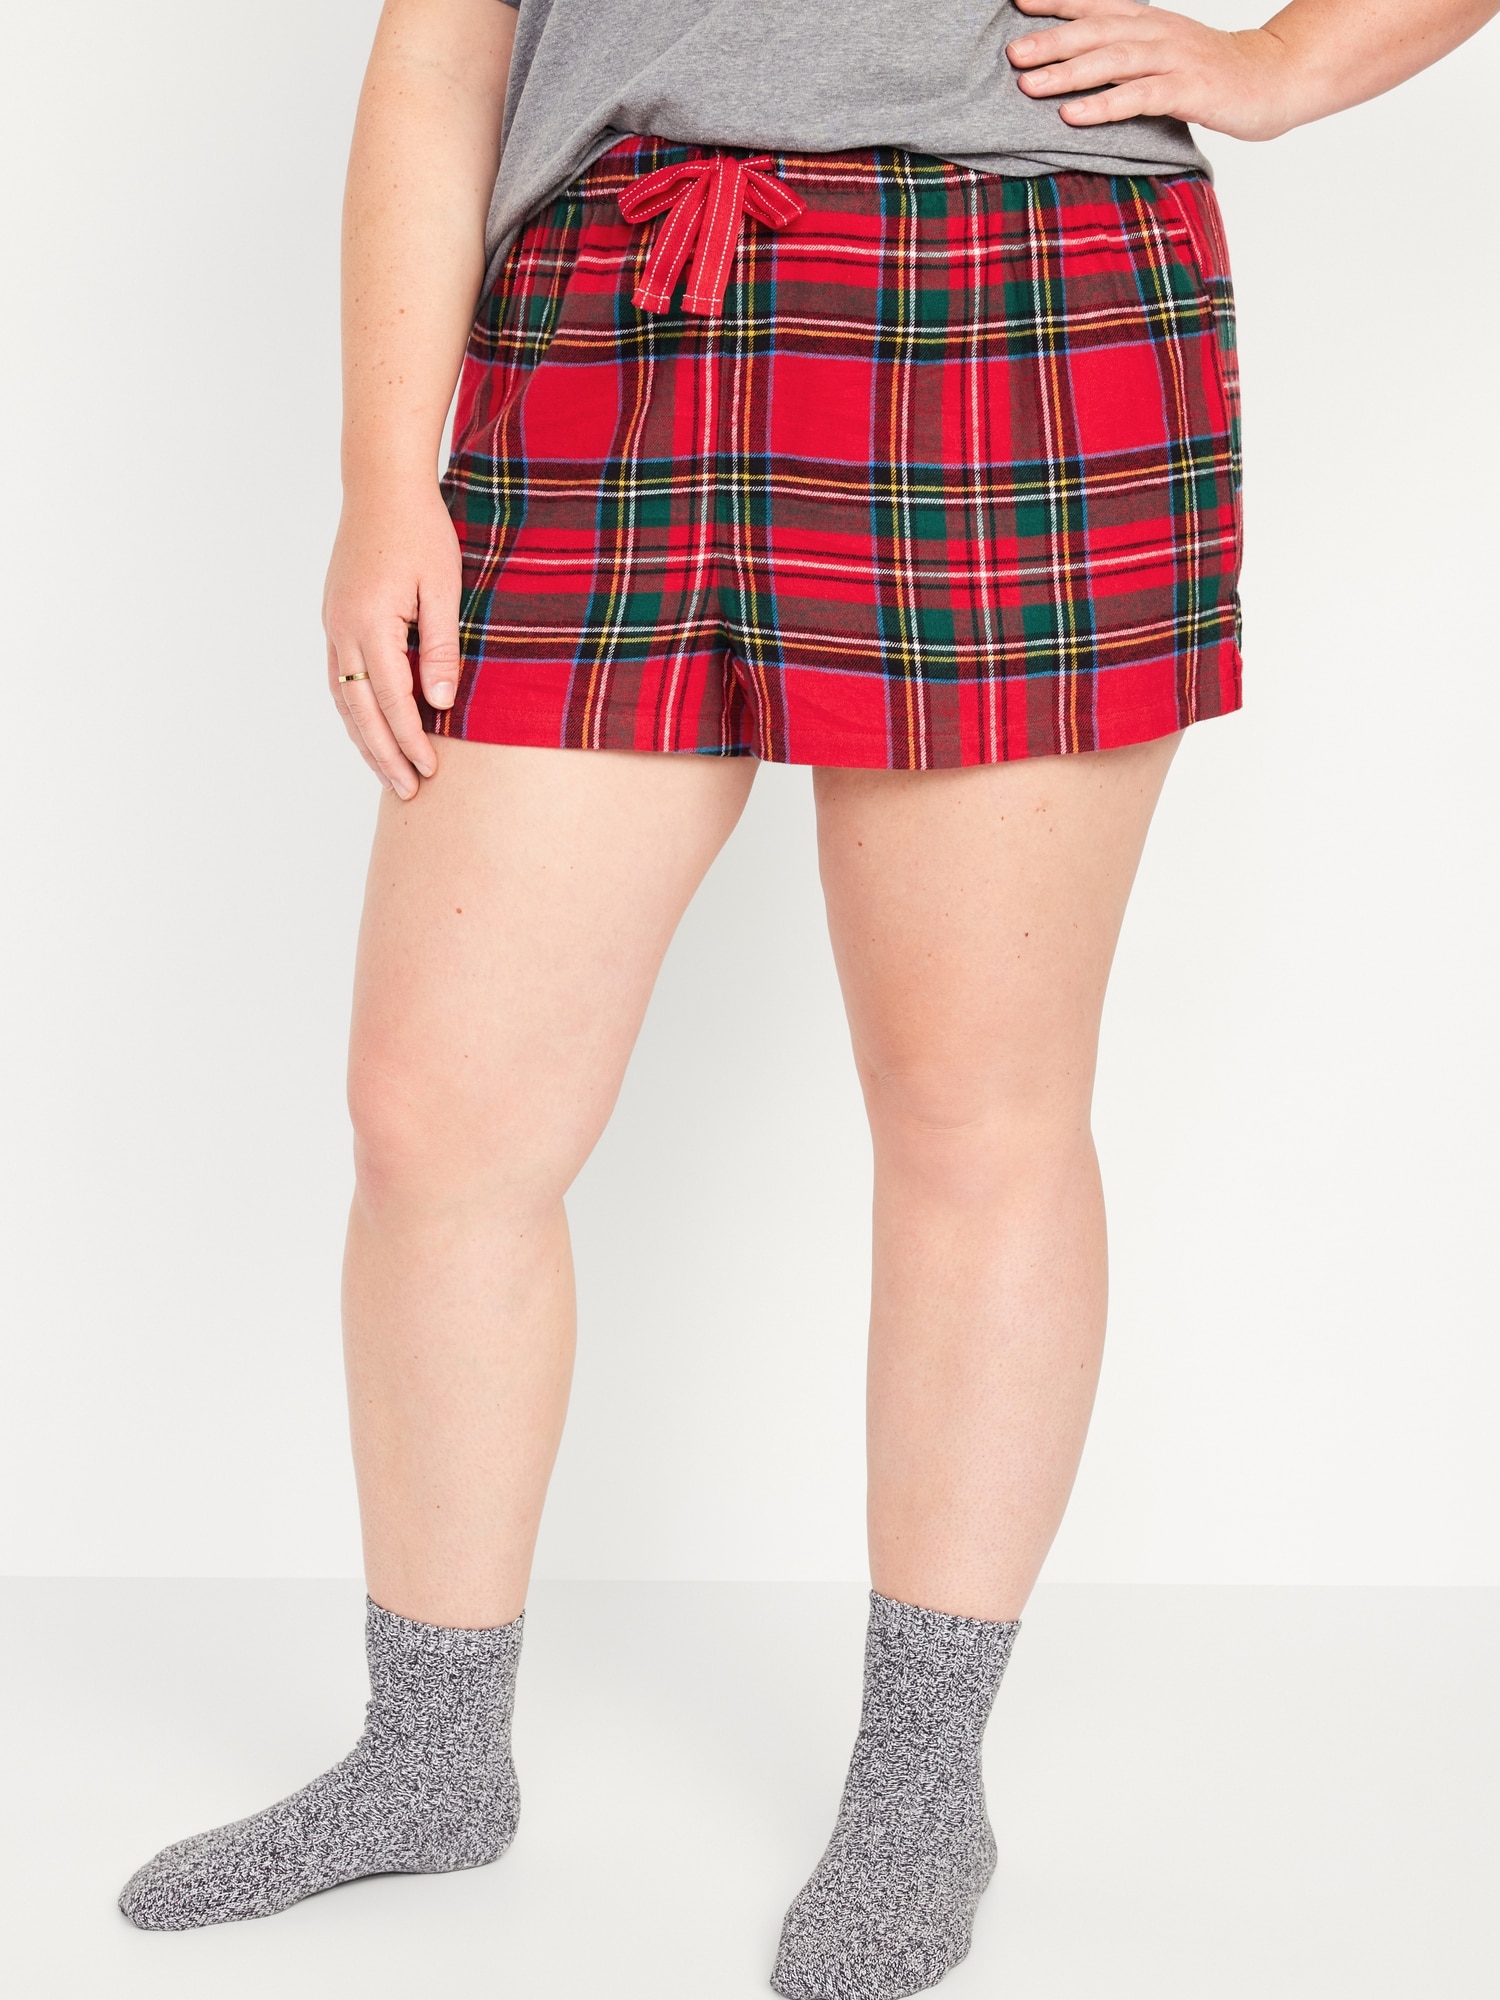 Matching Flannel Pajama Shorts for Women -- 2.5-inch inseam | Old Navy